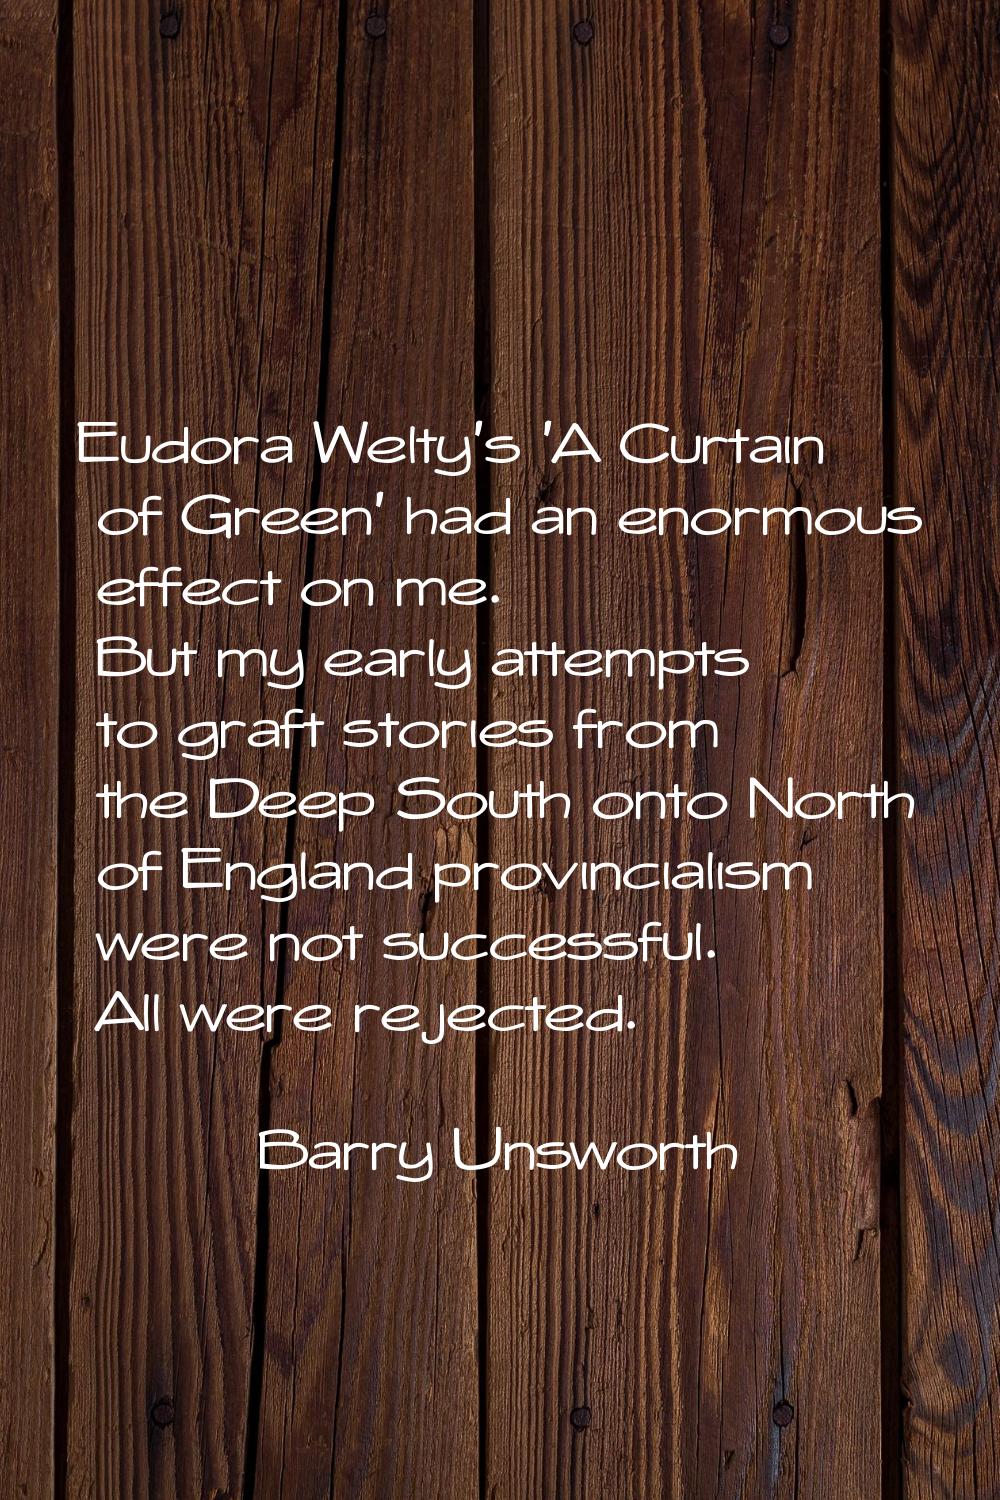 Eudora Welty's 'A Curtain of Green' had an enormous effect on me. But my early attempts to graft st